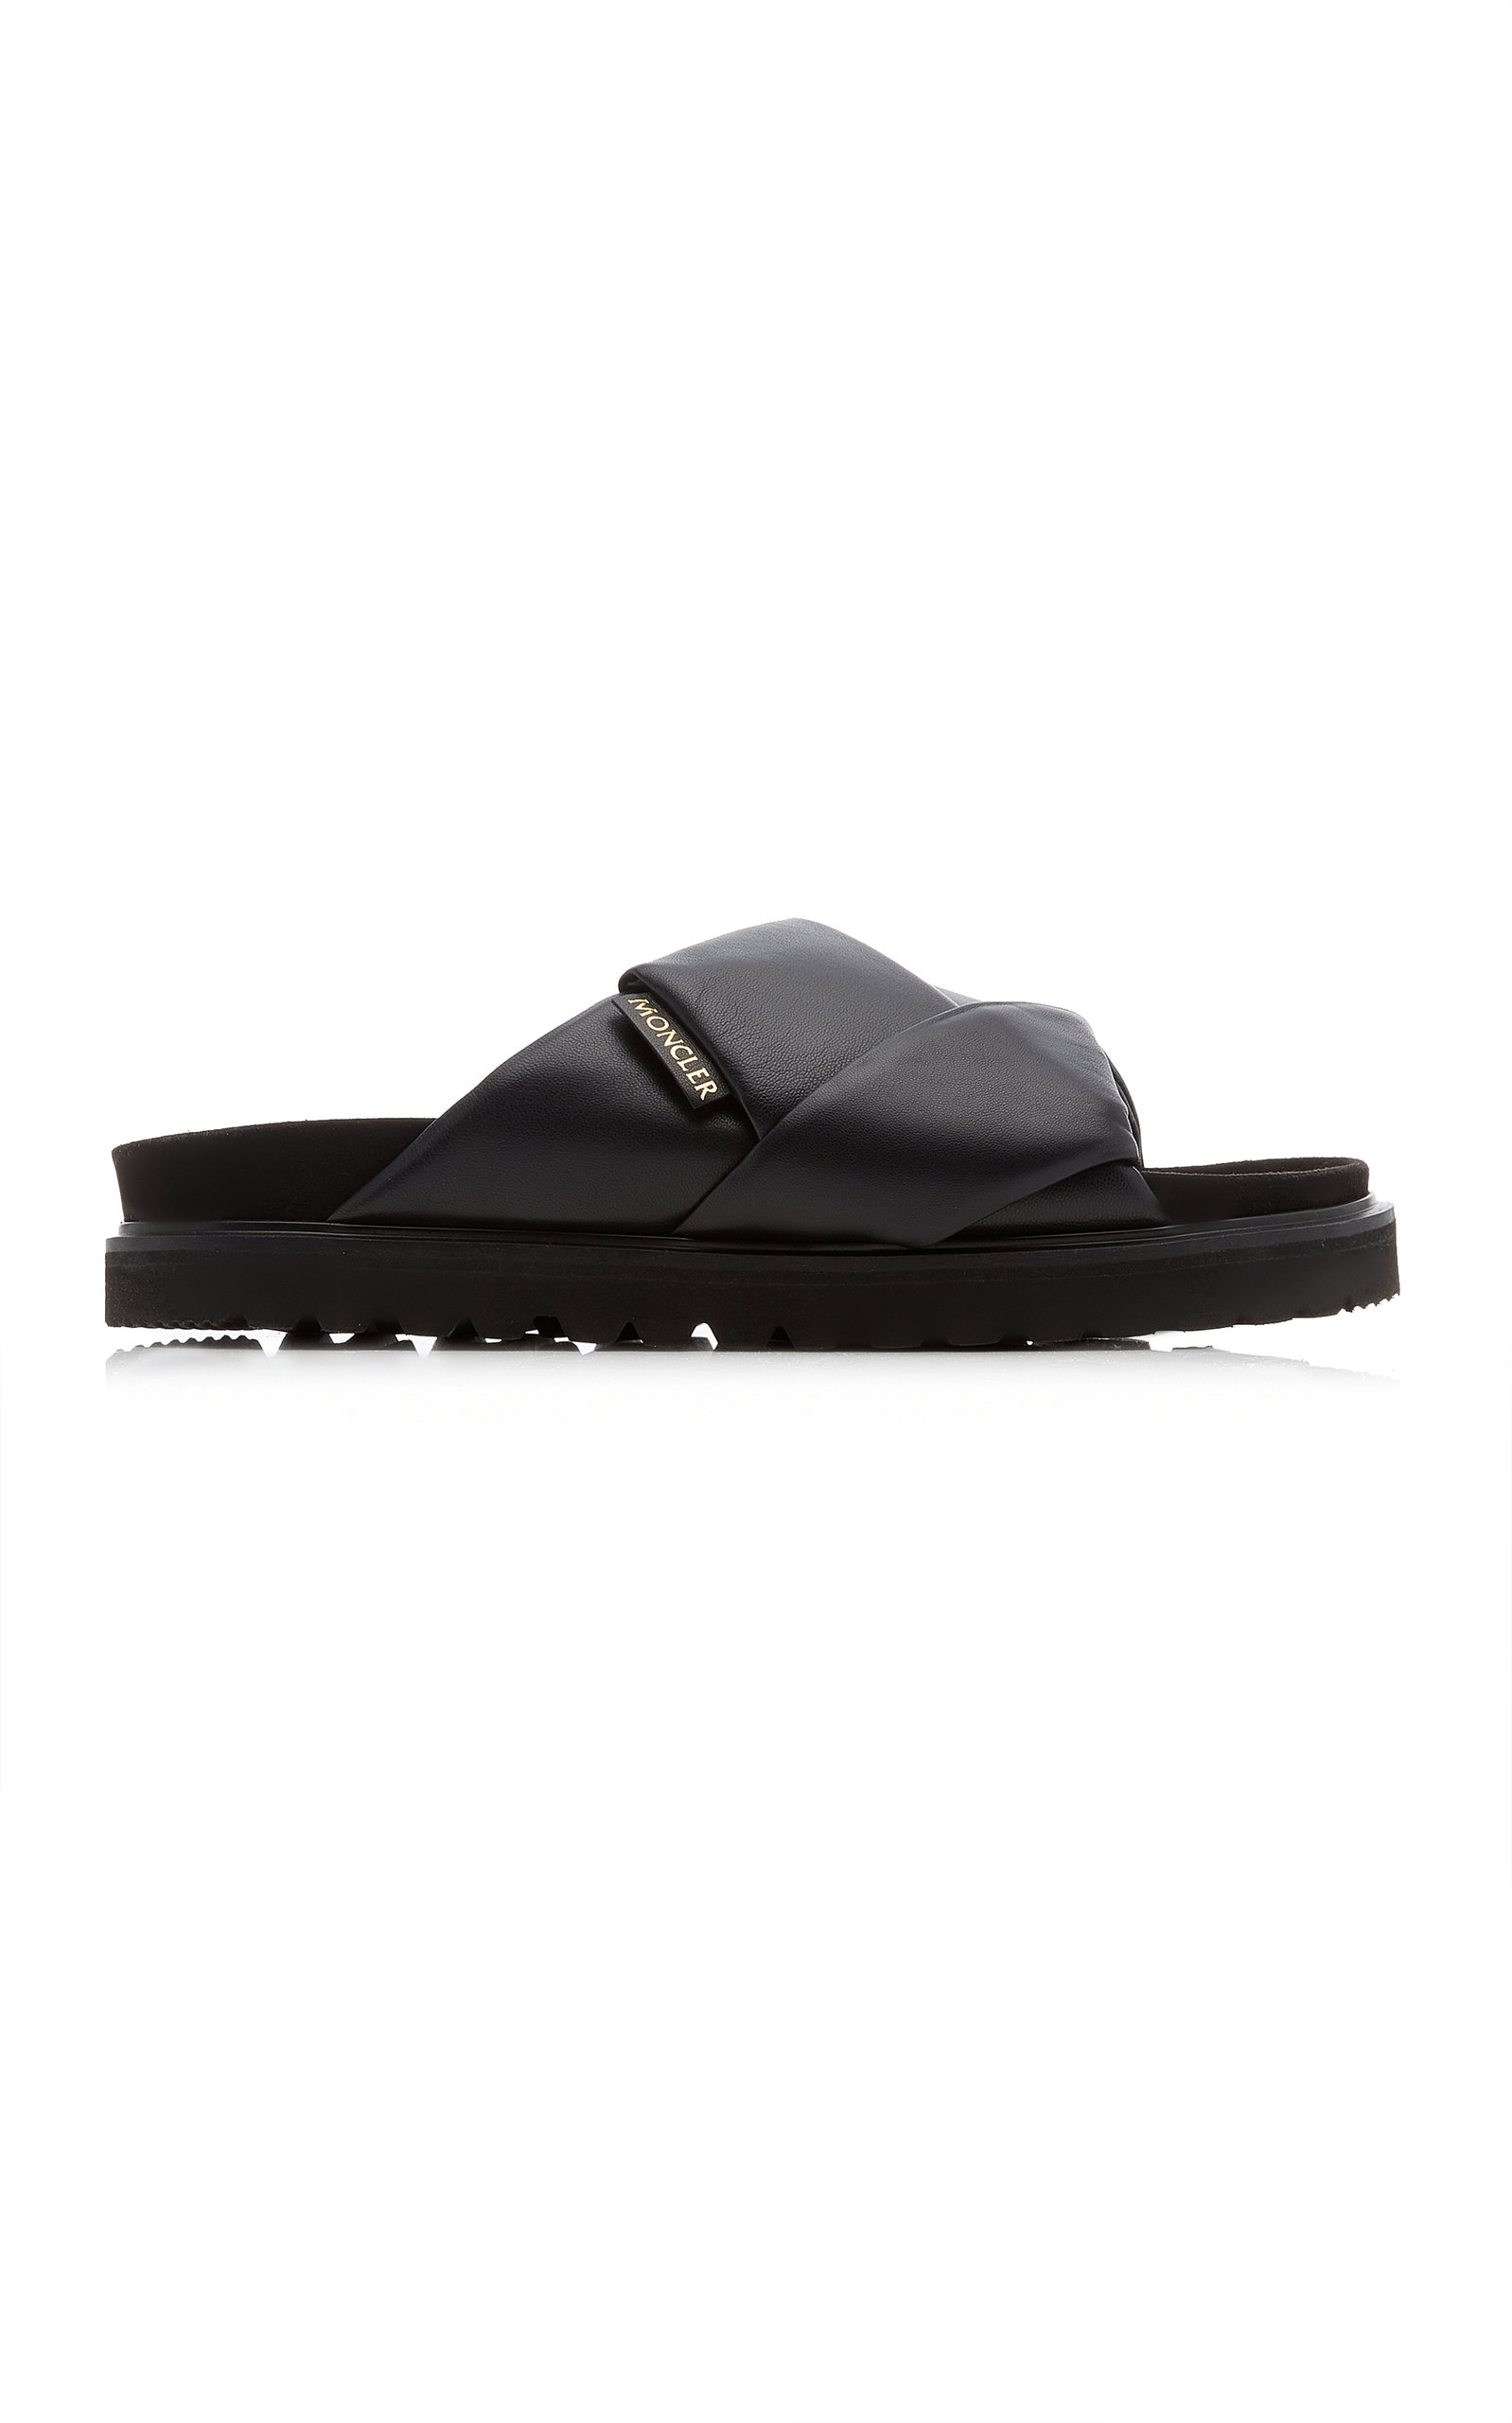 MONCLER WOMEN'S PADDED LEATHER SANDALS